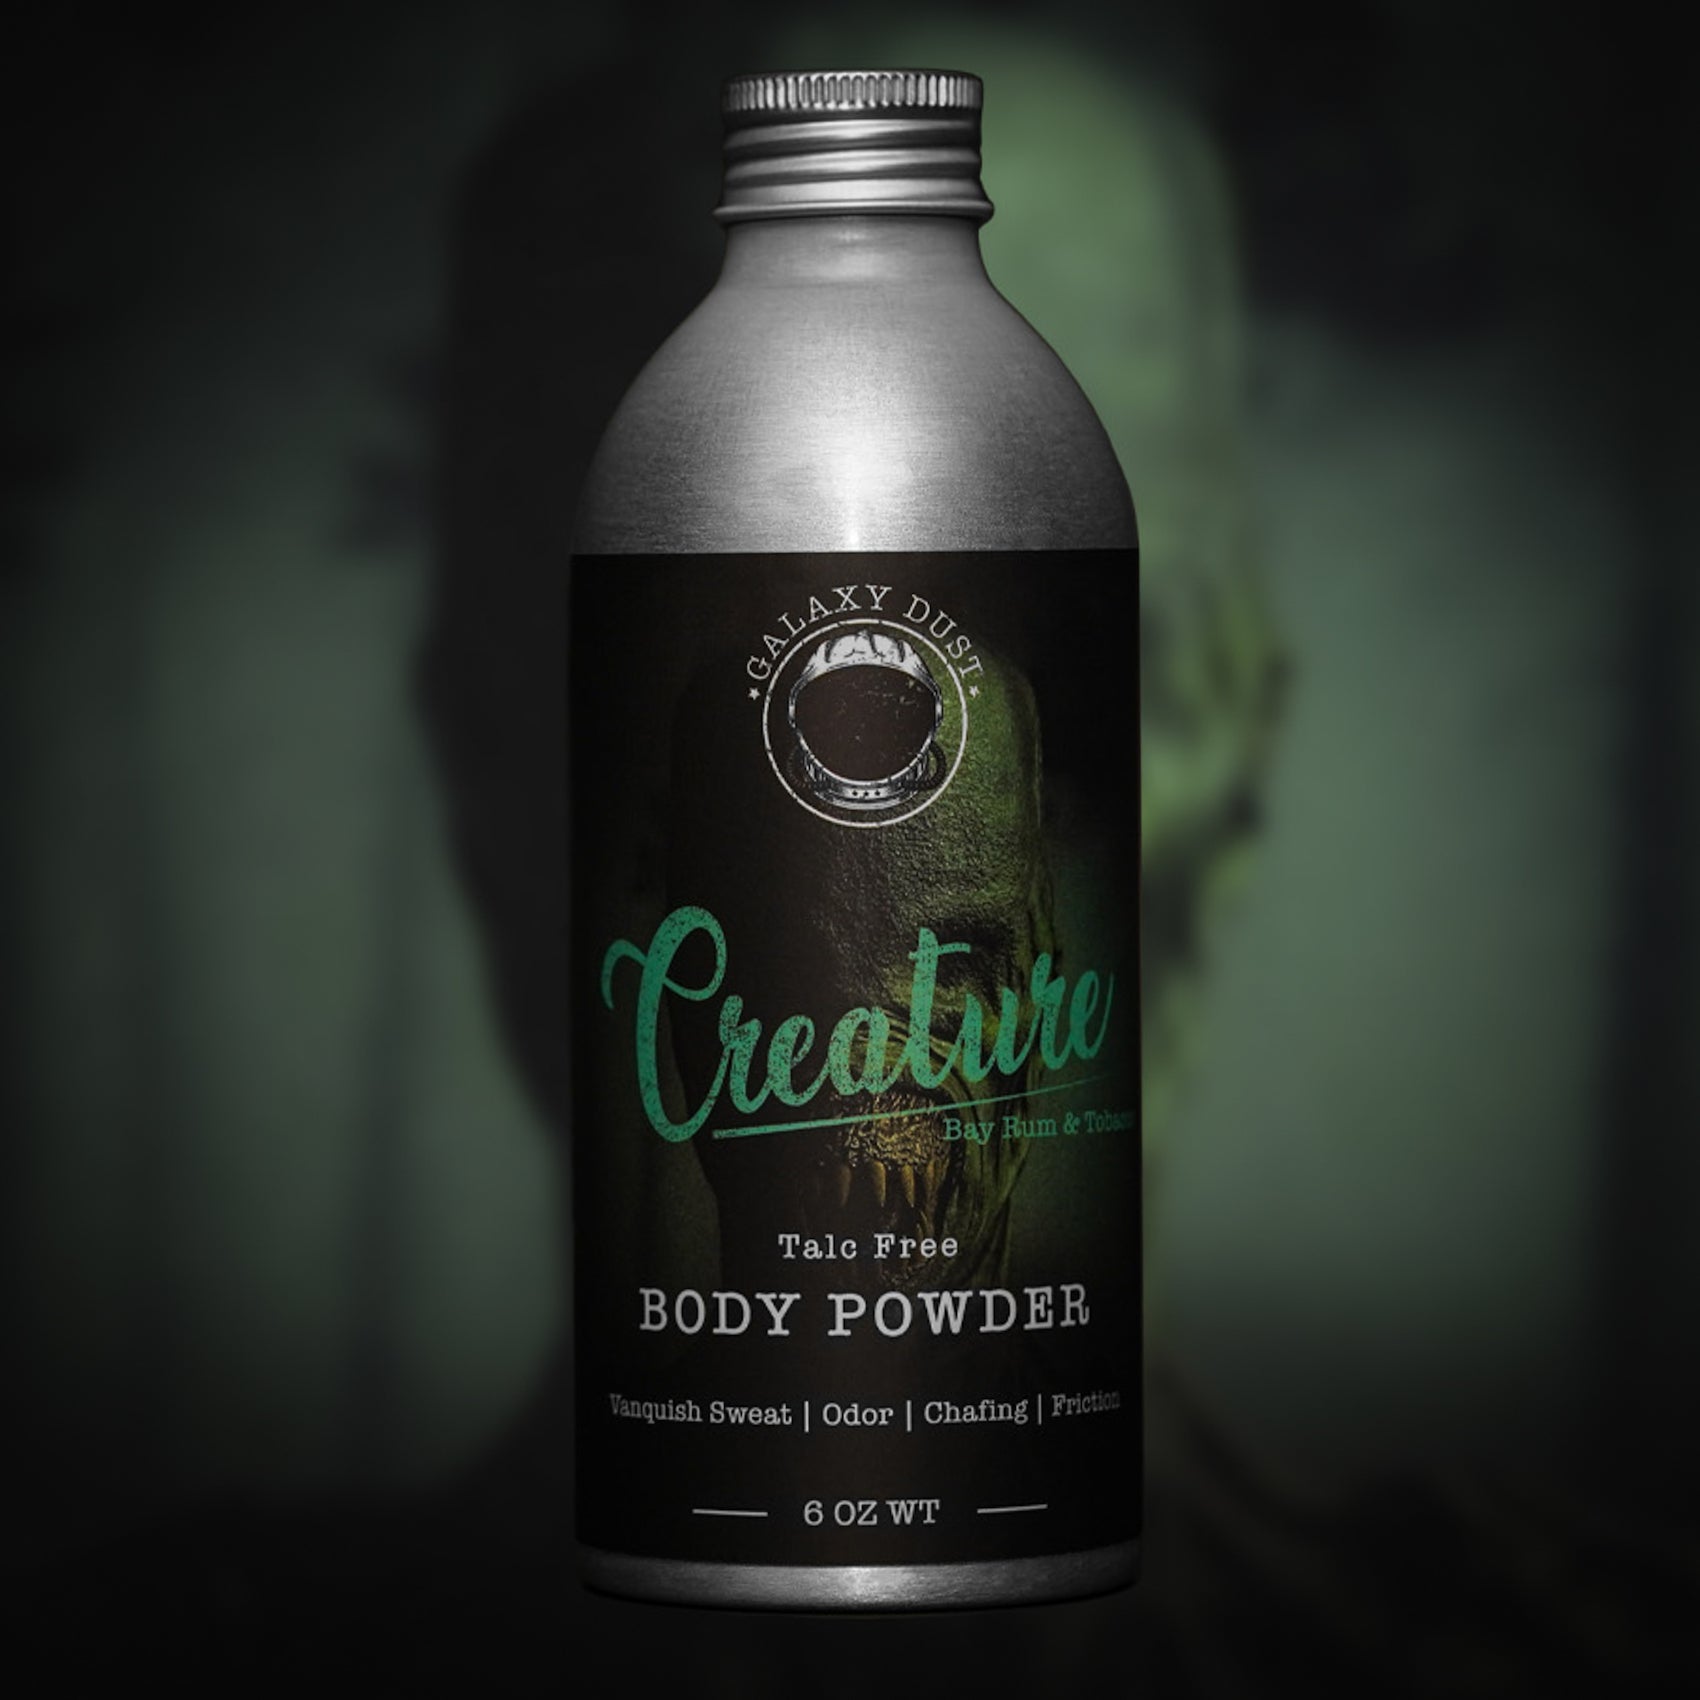 A bottle of Creature body powder for men